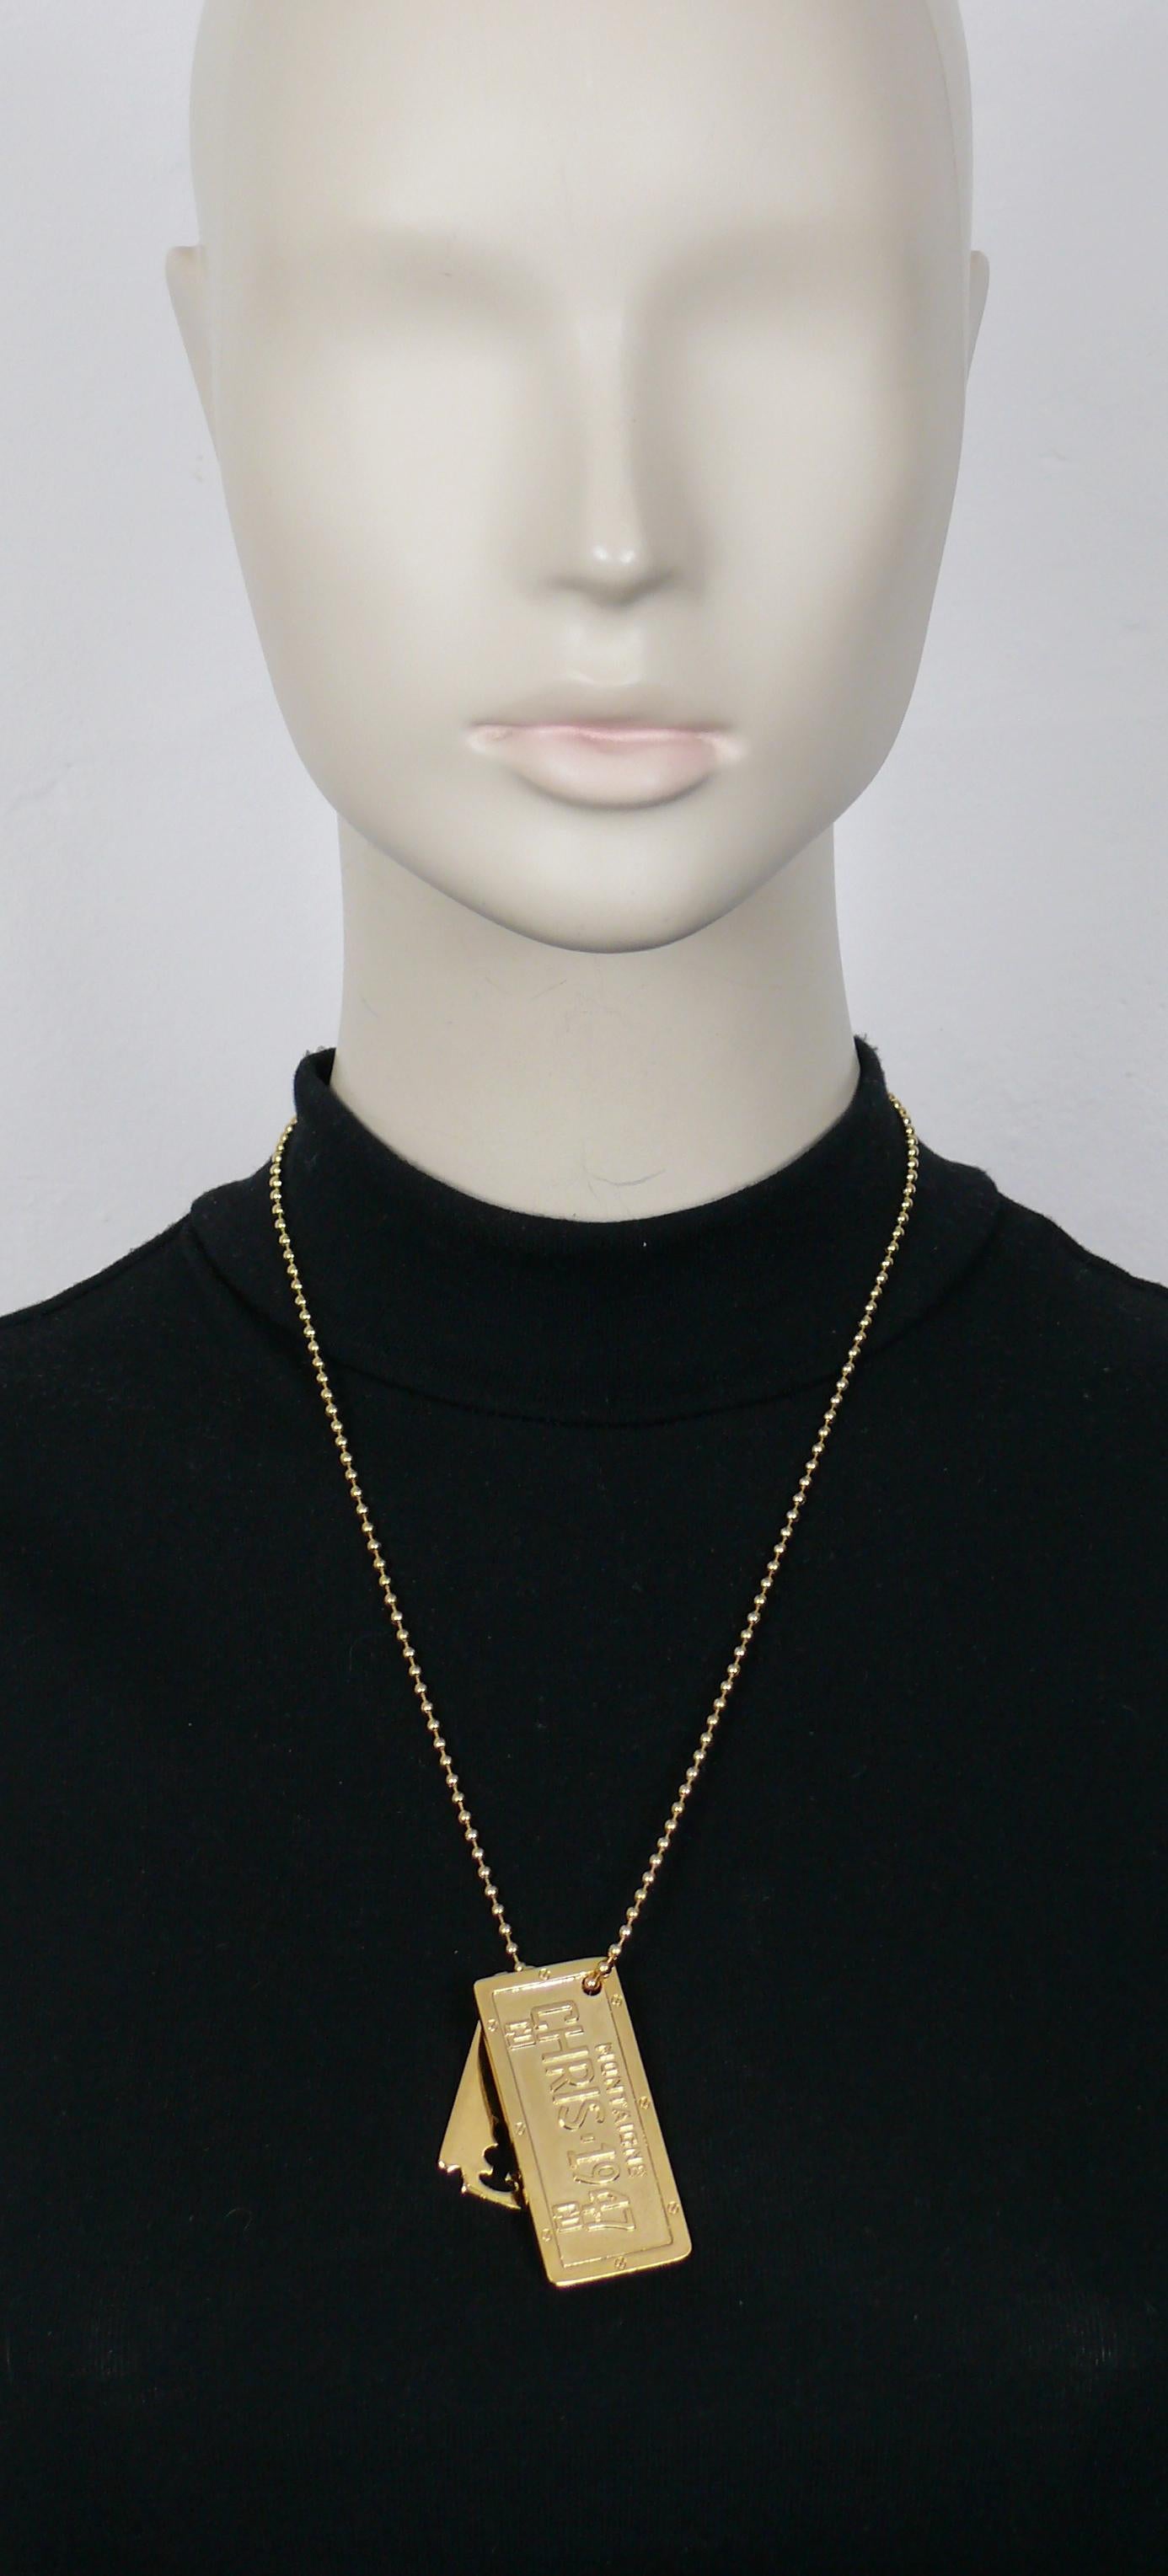 CHRISTIAN DIOR by JOHN GALLIANO gold tone ball chain necklace featuring a dog tag pendant embossed MONTAIGNE CHRIS 1947 CD and a razor blade pendant.

No clasp.
Slips on.

Unmarked (usual for this model).

Indicative measurements : length worn